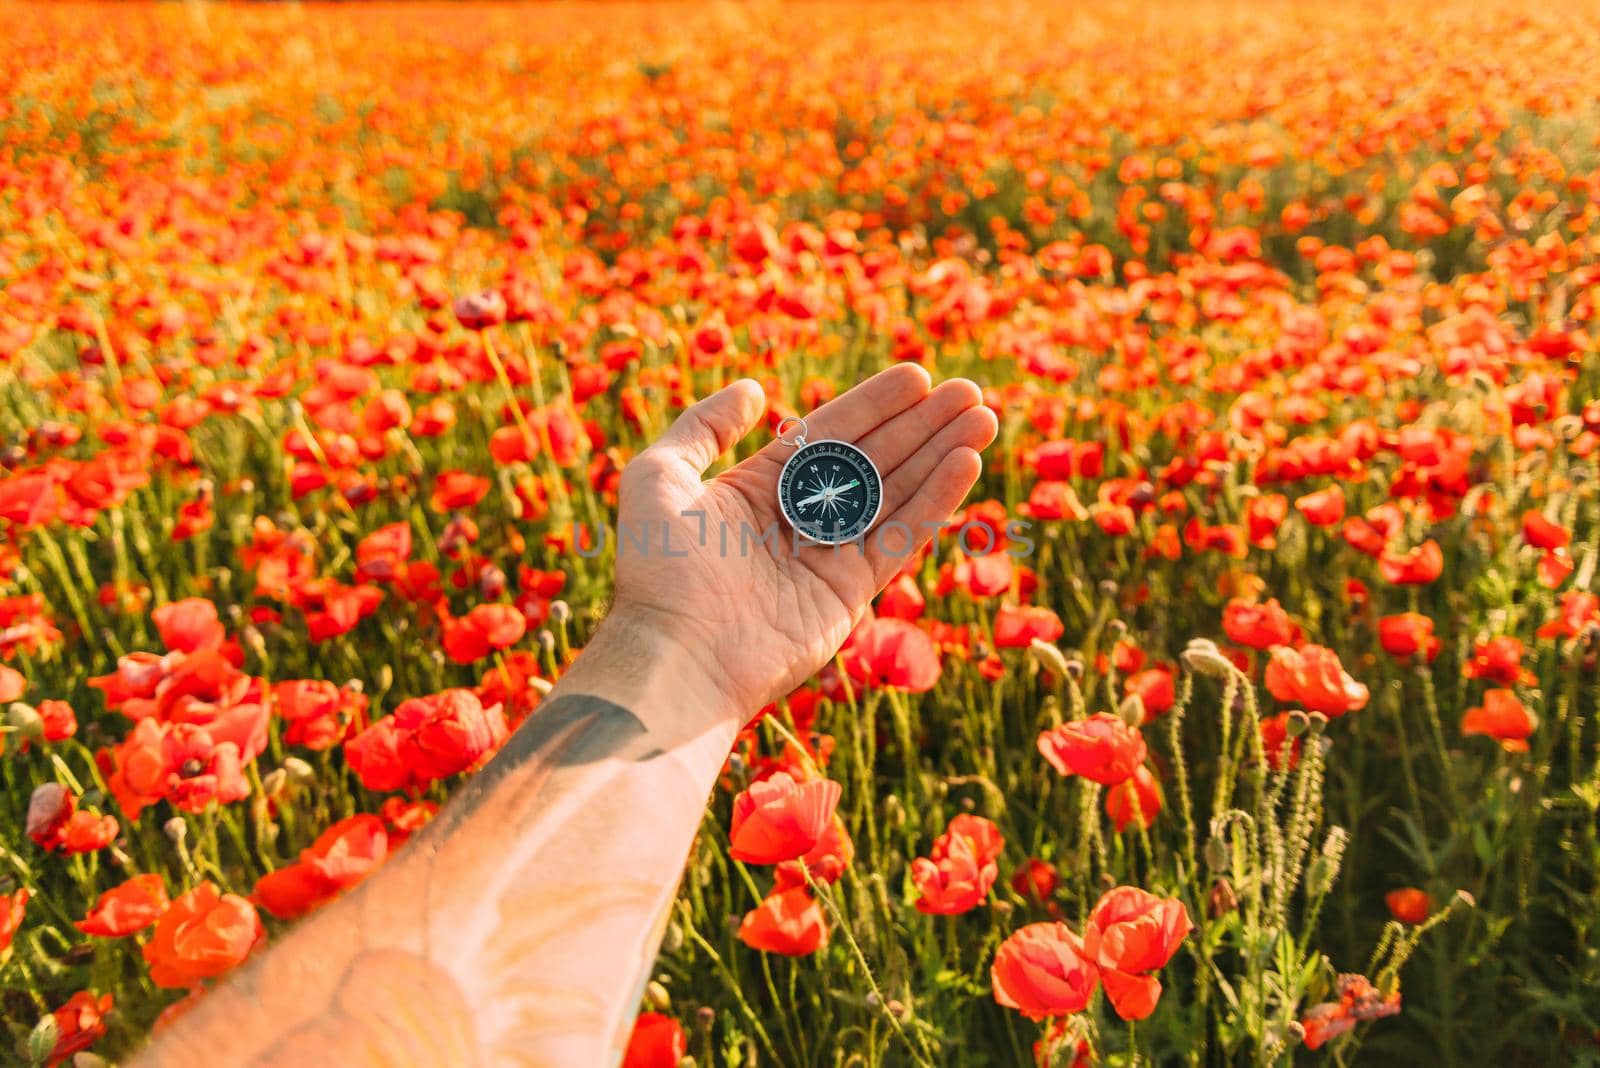 Male hand with compass on background of red poppies meadow, point of view.